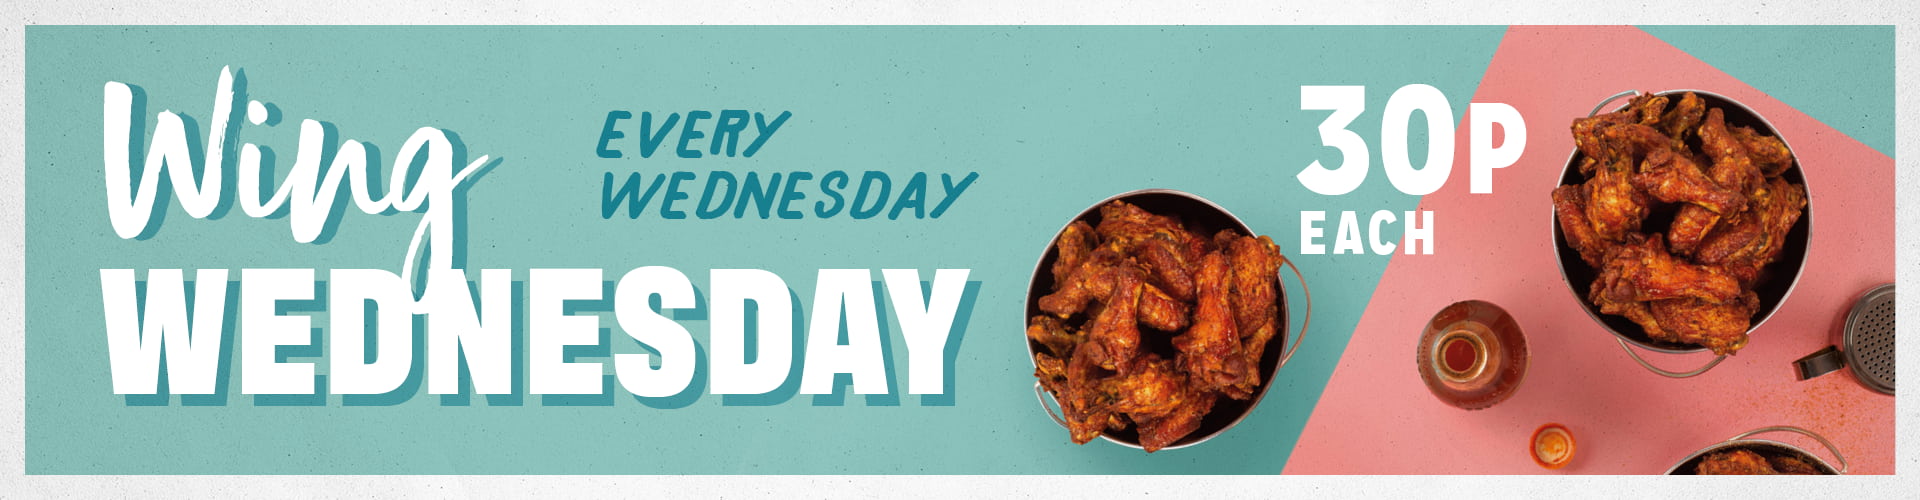 Wing Wednesday, Every Wednesday - 30p each!